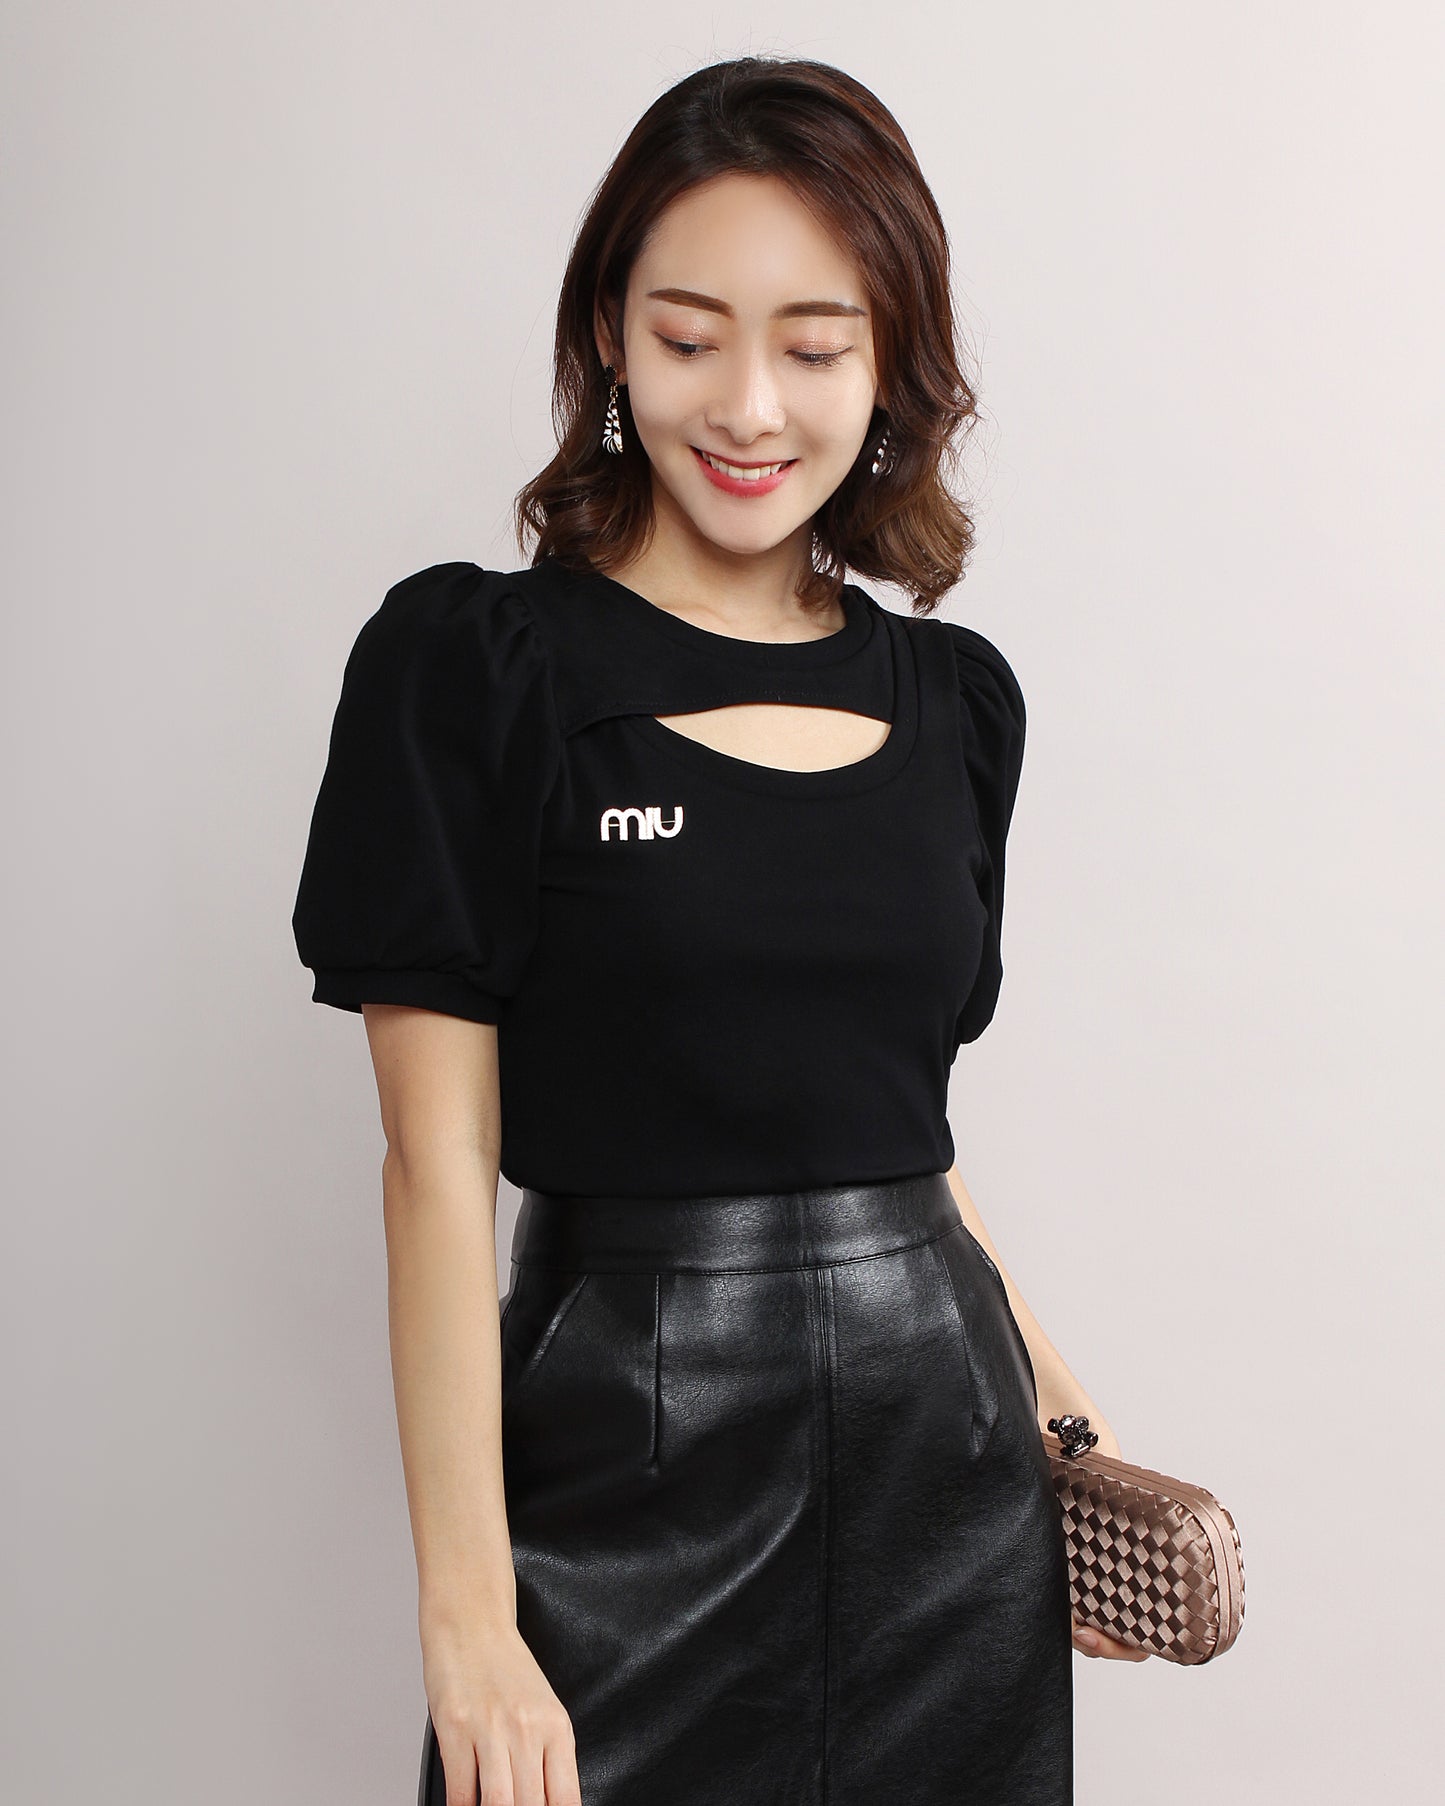 Cut Out Detail Crop Tee Blouse